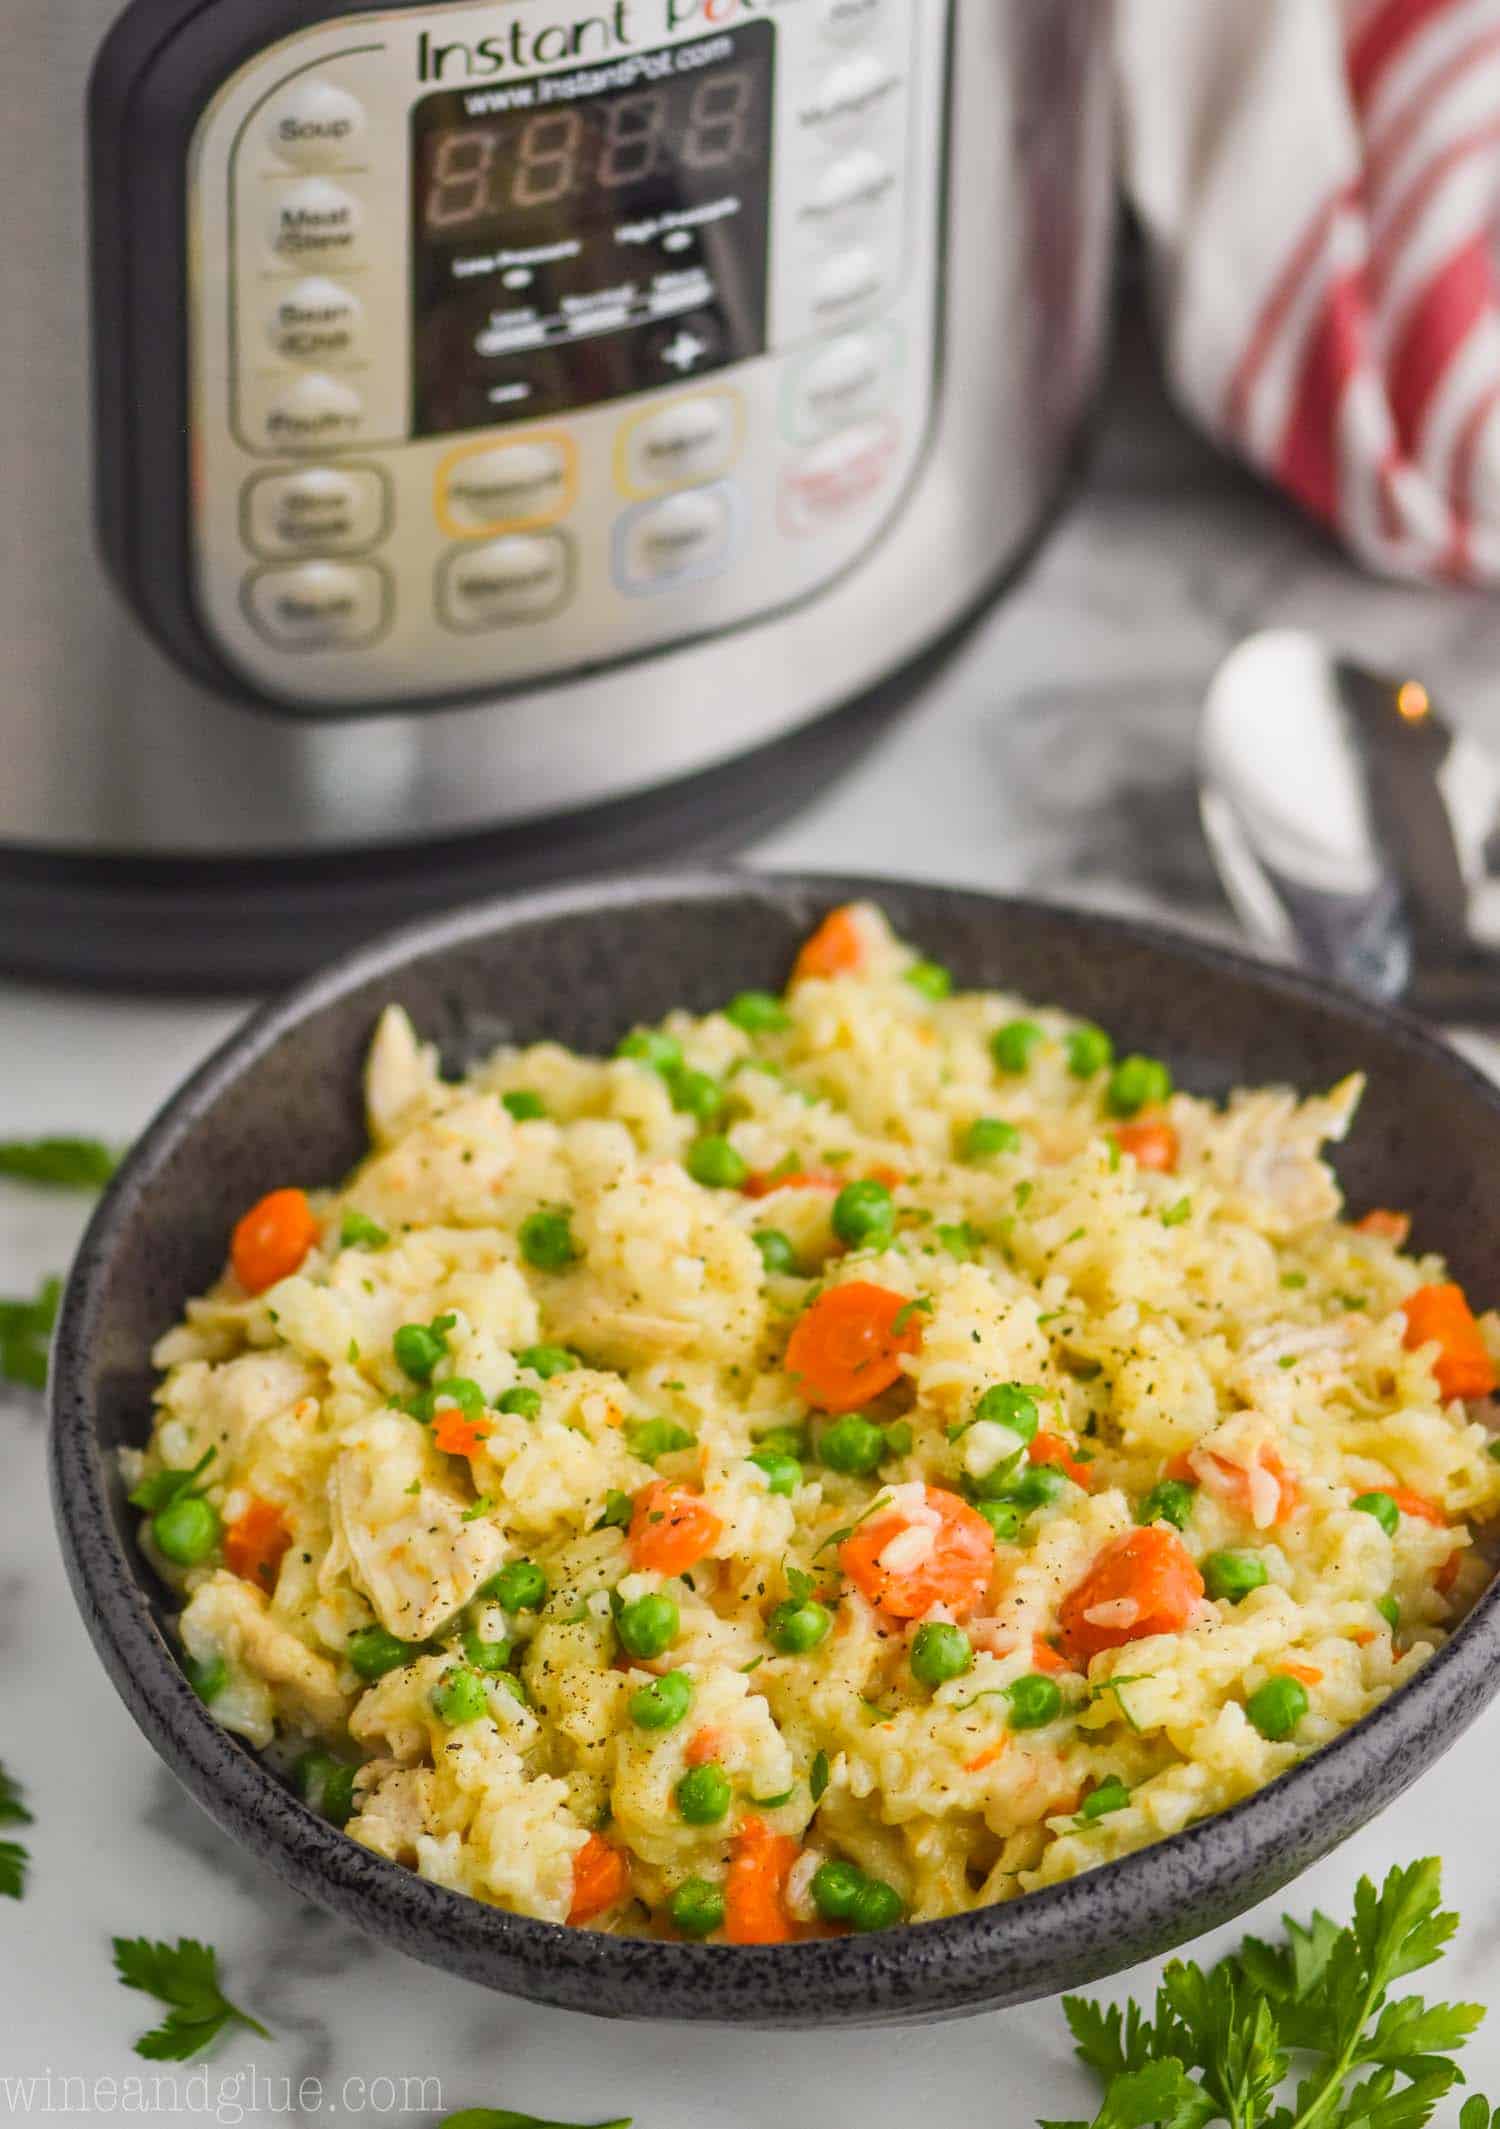 https://simplejoy.com/wp-content/uploads/2019/09/chicken_and_rice_instant_pot.jpg